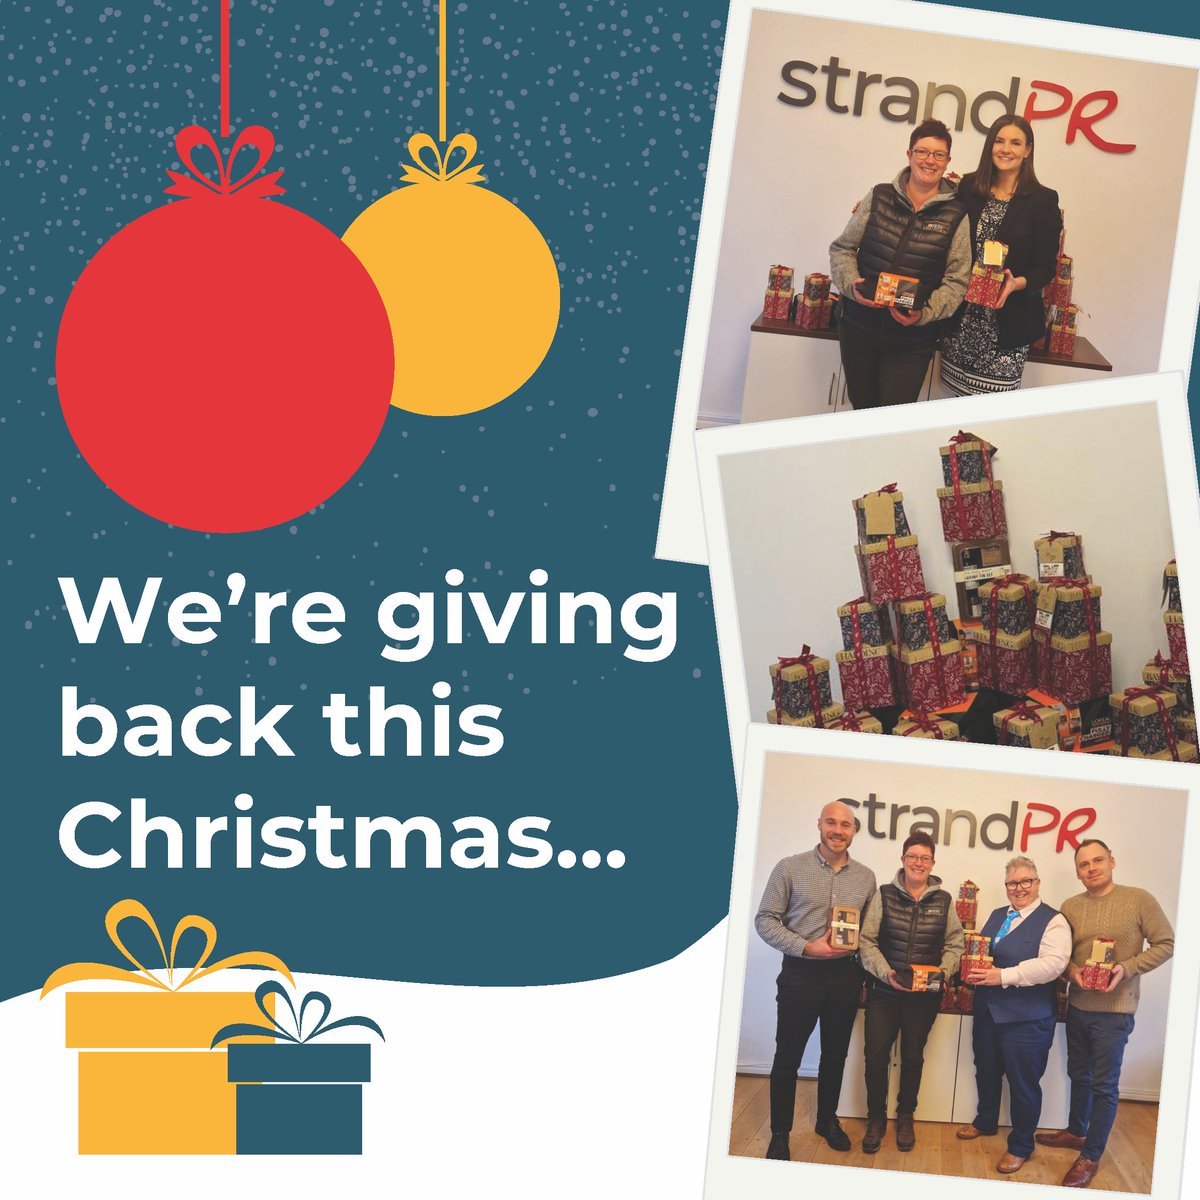 Christmas is a time for giving - and this year we decided to give to the Buntingford Food Bank rather than sending company cards and gifts. It's a pleasure to be able to help - and we hope our gifts will help put a smile on someone's face this Christmas Day. #MerryChristmas